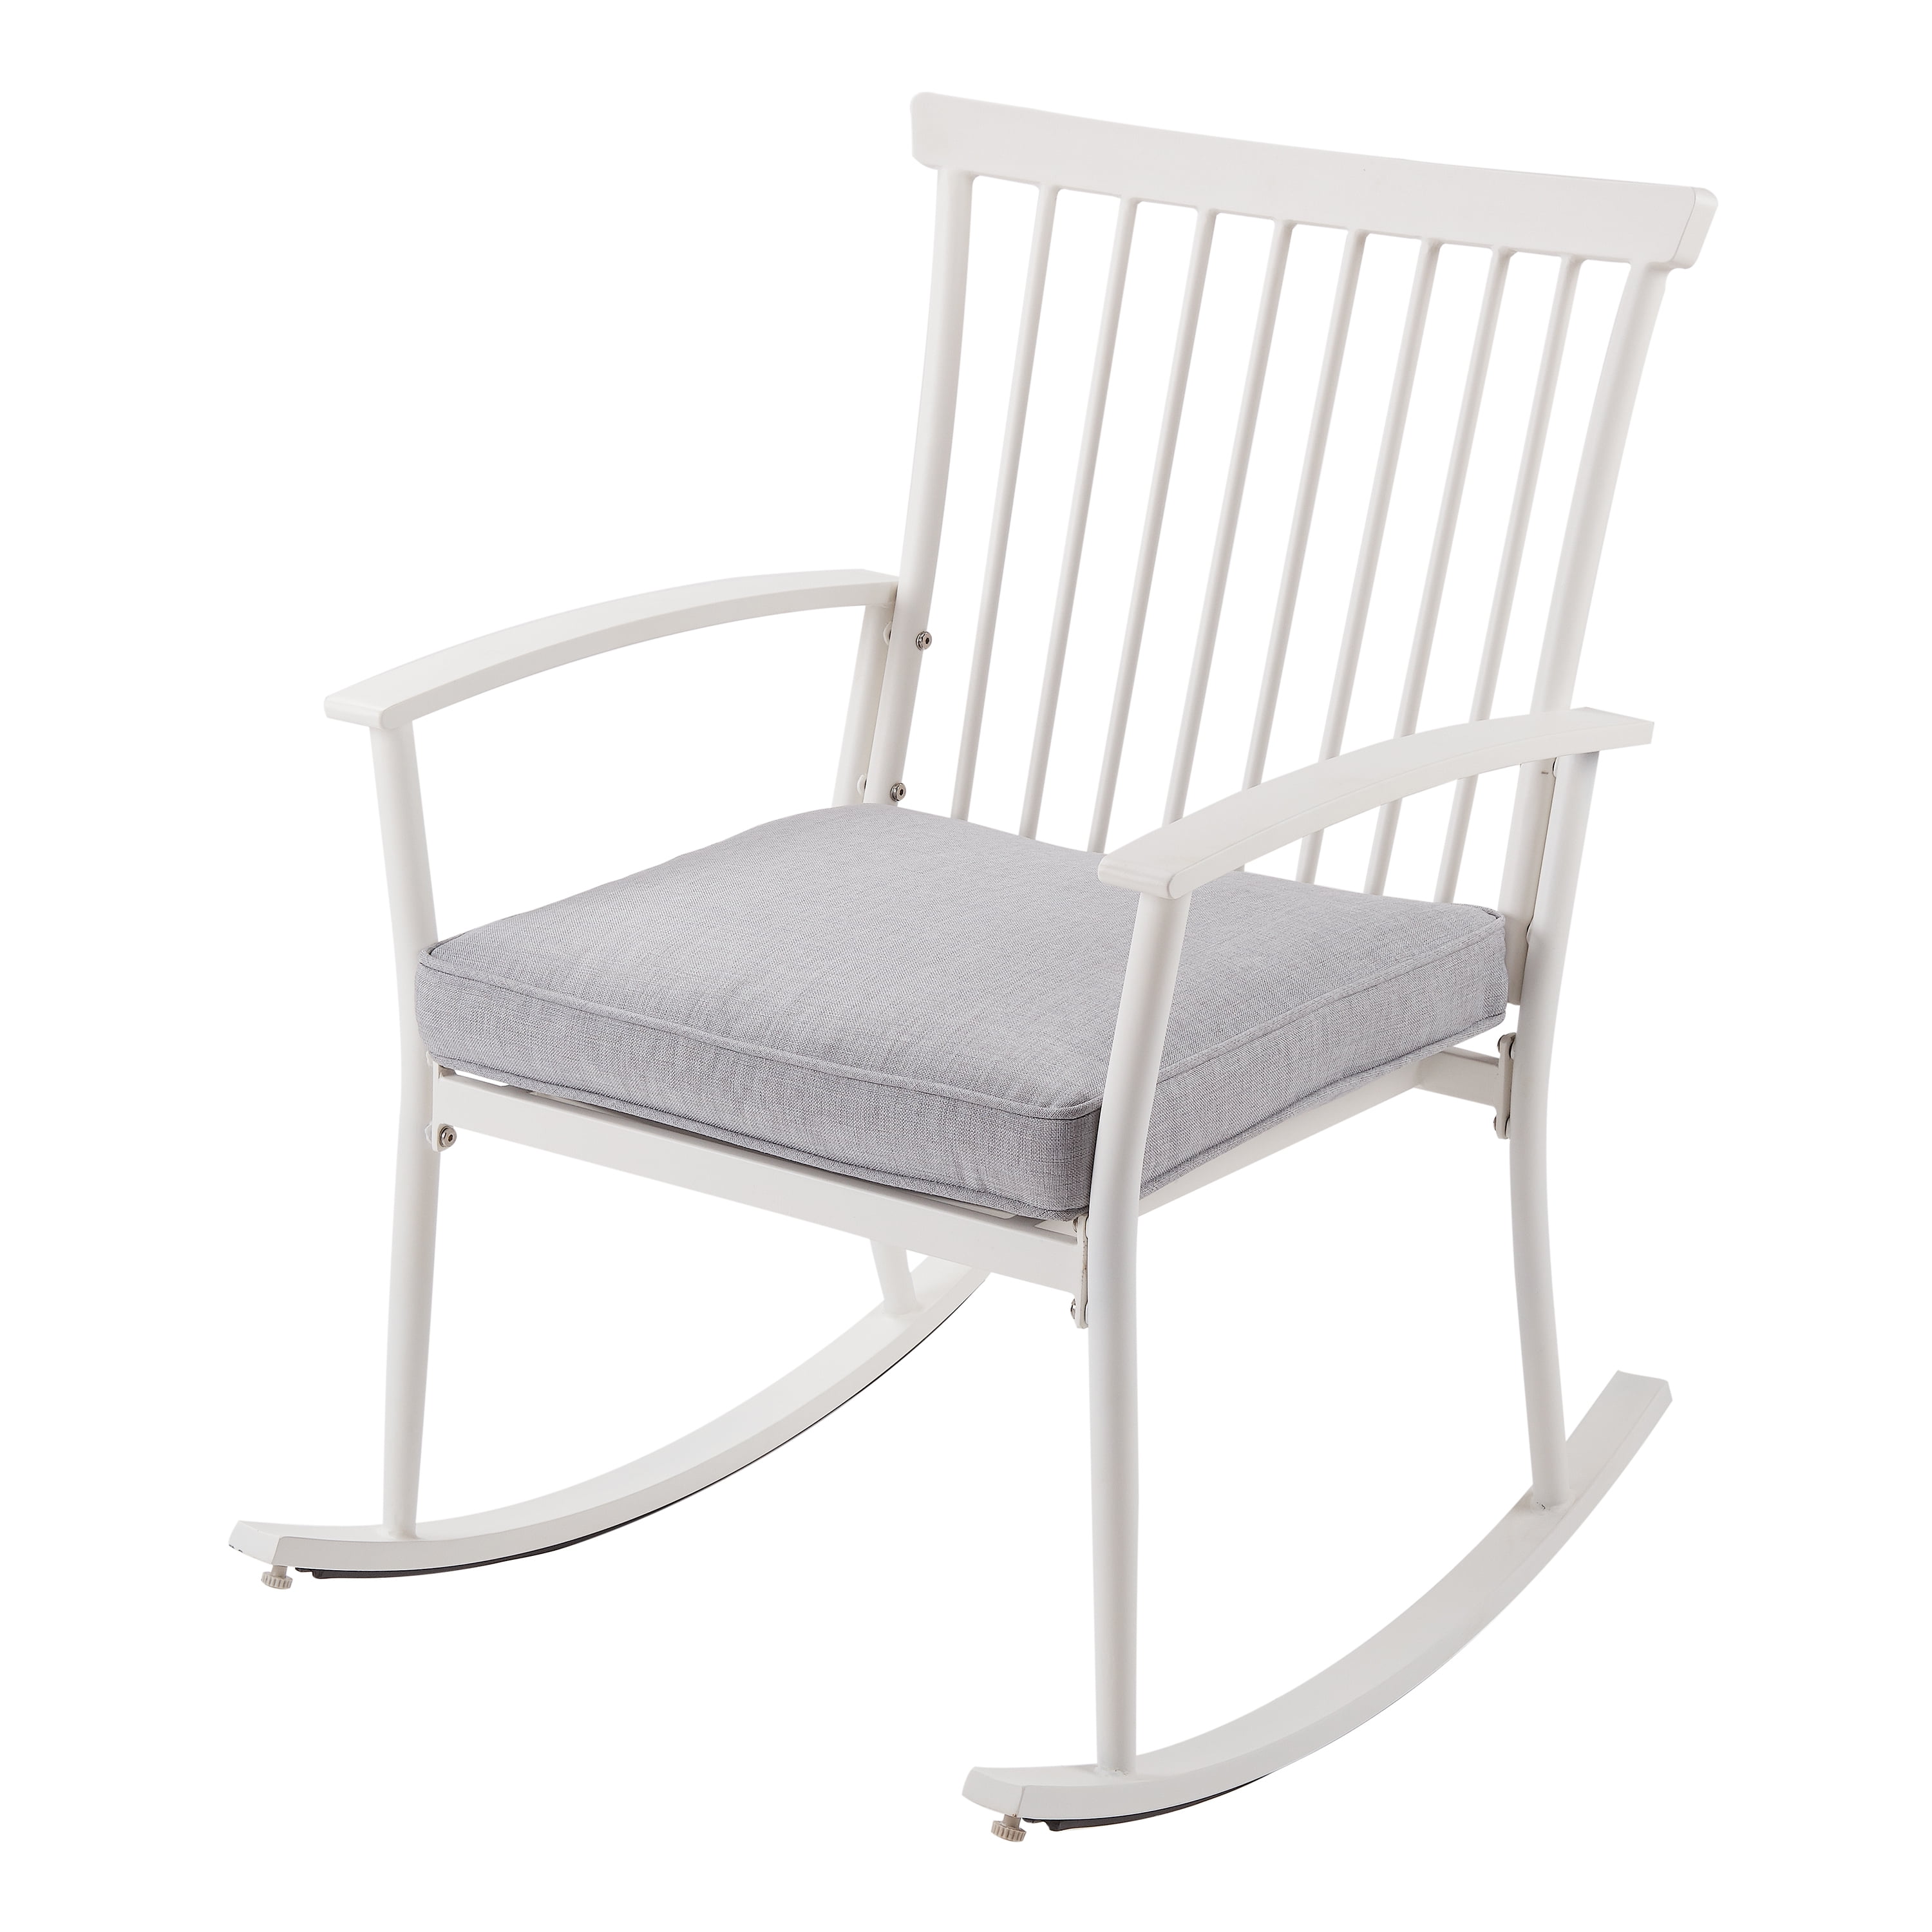 Better Homes Gardens Shaker Patio Rocking Chair In White With Gray Cushion Walmart Com